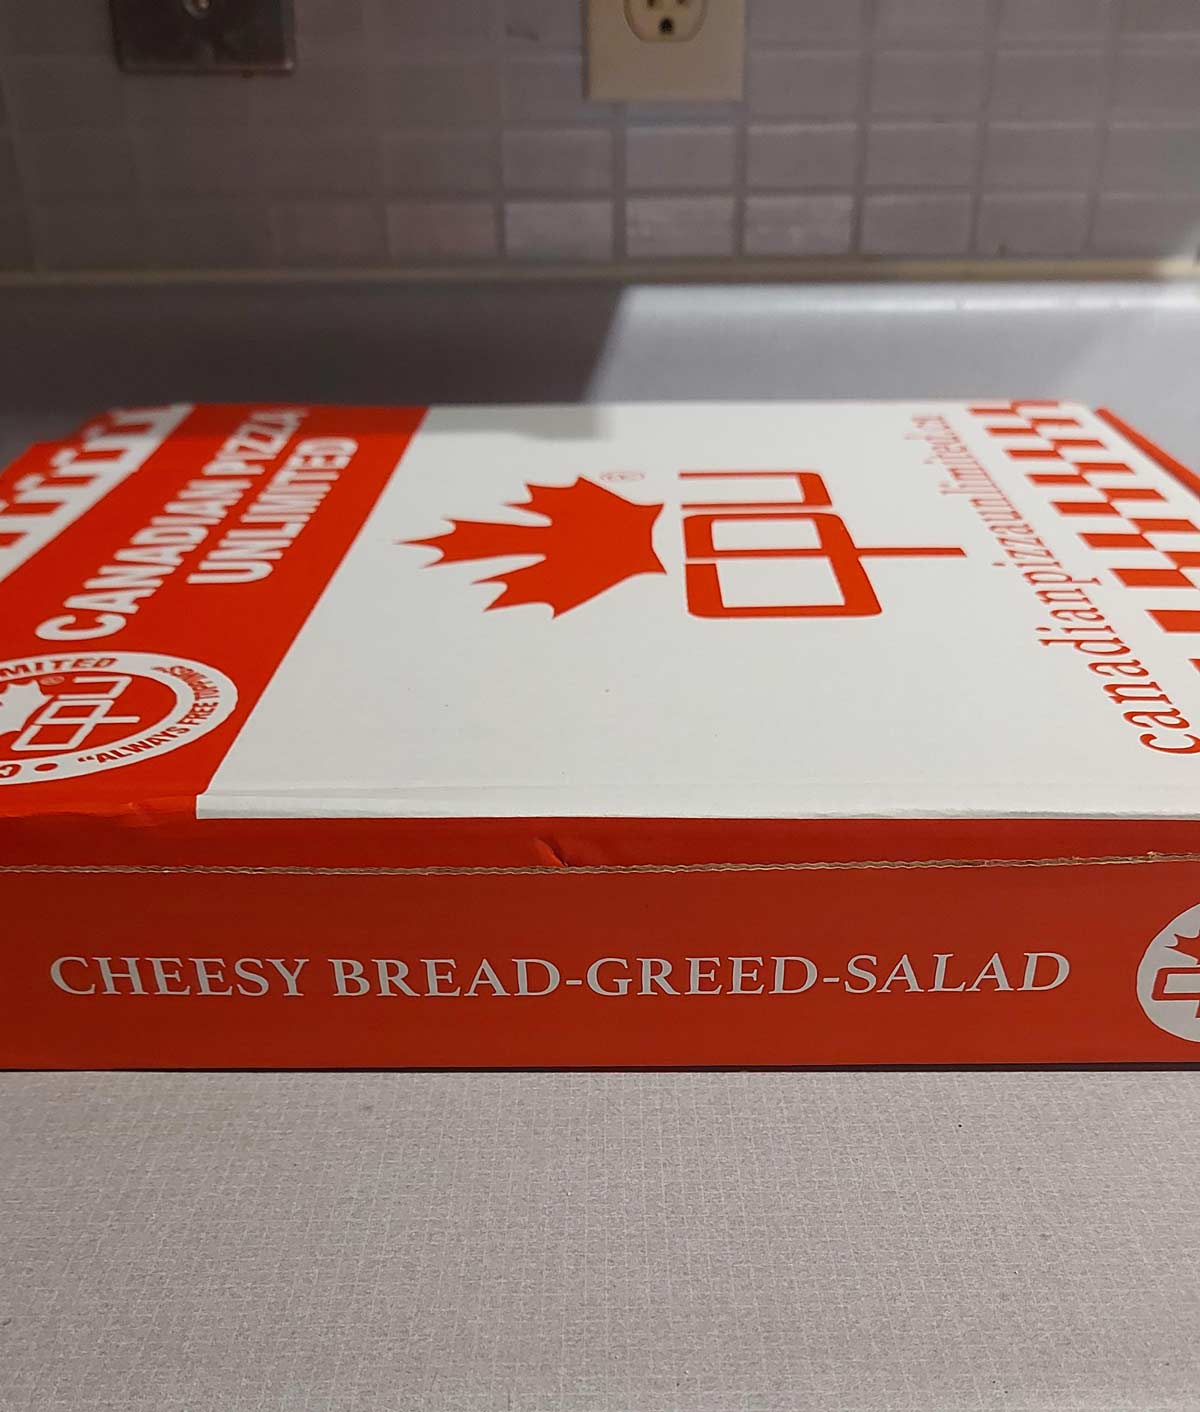 My pizza box had a spelling error, the word Greek was changed to greed